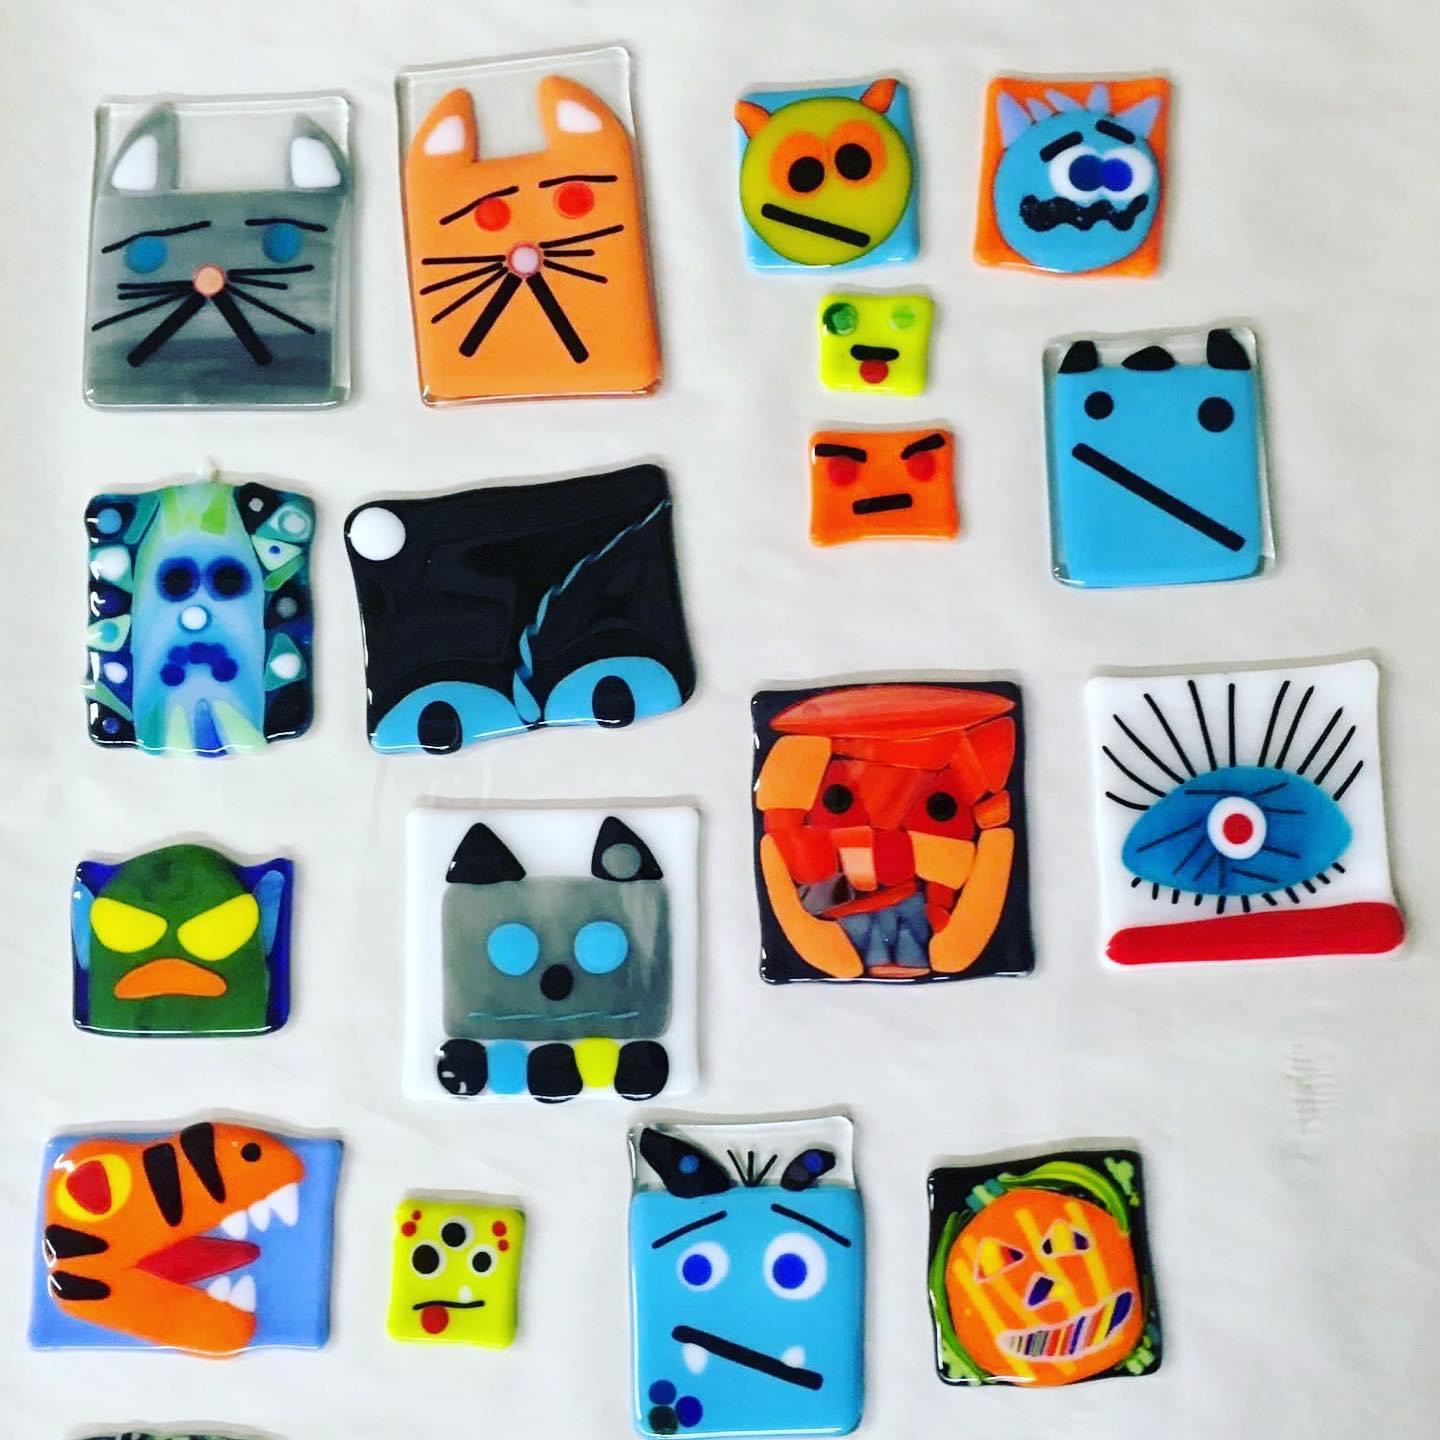 Vernon Community Arts Centre - Fused Glass Monster Tiles for Ages 6 to 106